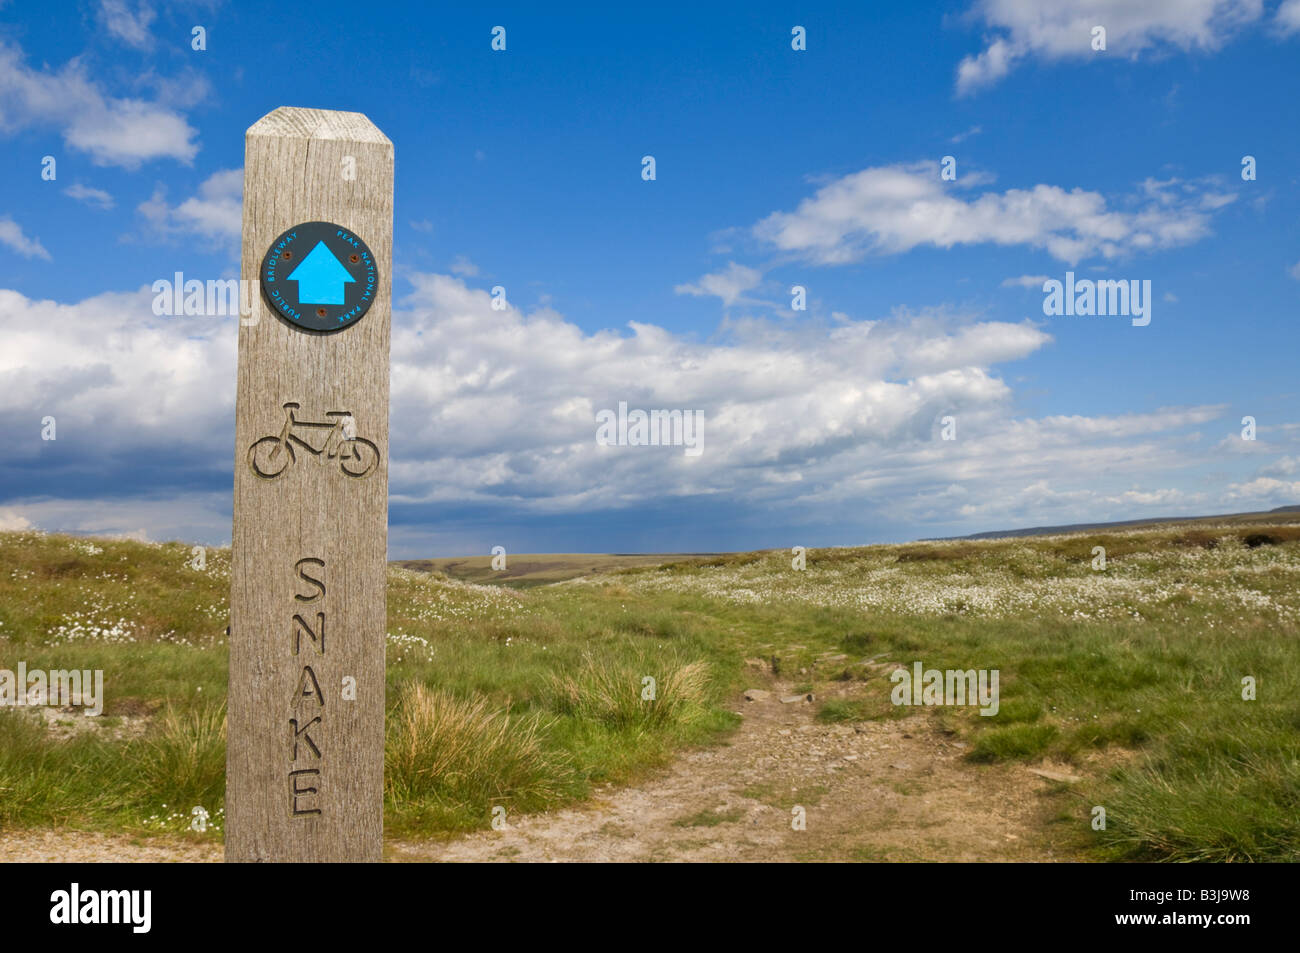 Public footpath wooden path marker signpost to the Snake Pass Bleaklow moor Derbyshire England UK GB EU Europe Stock Photo